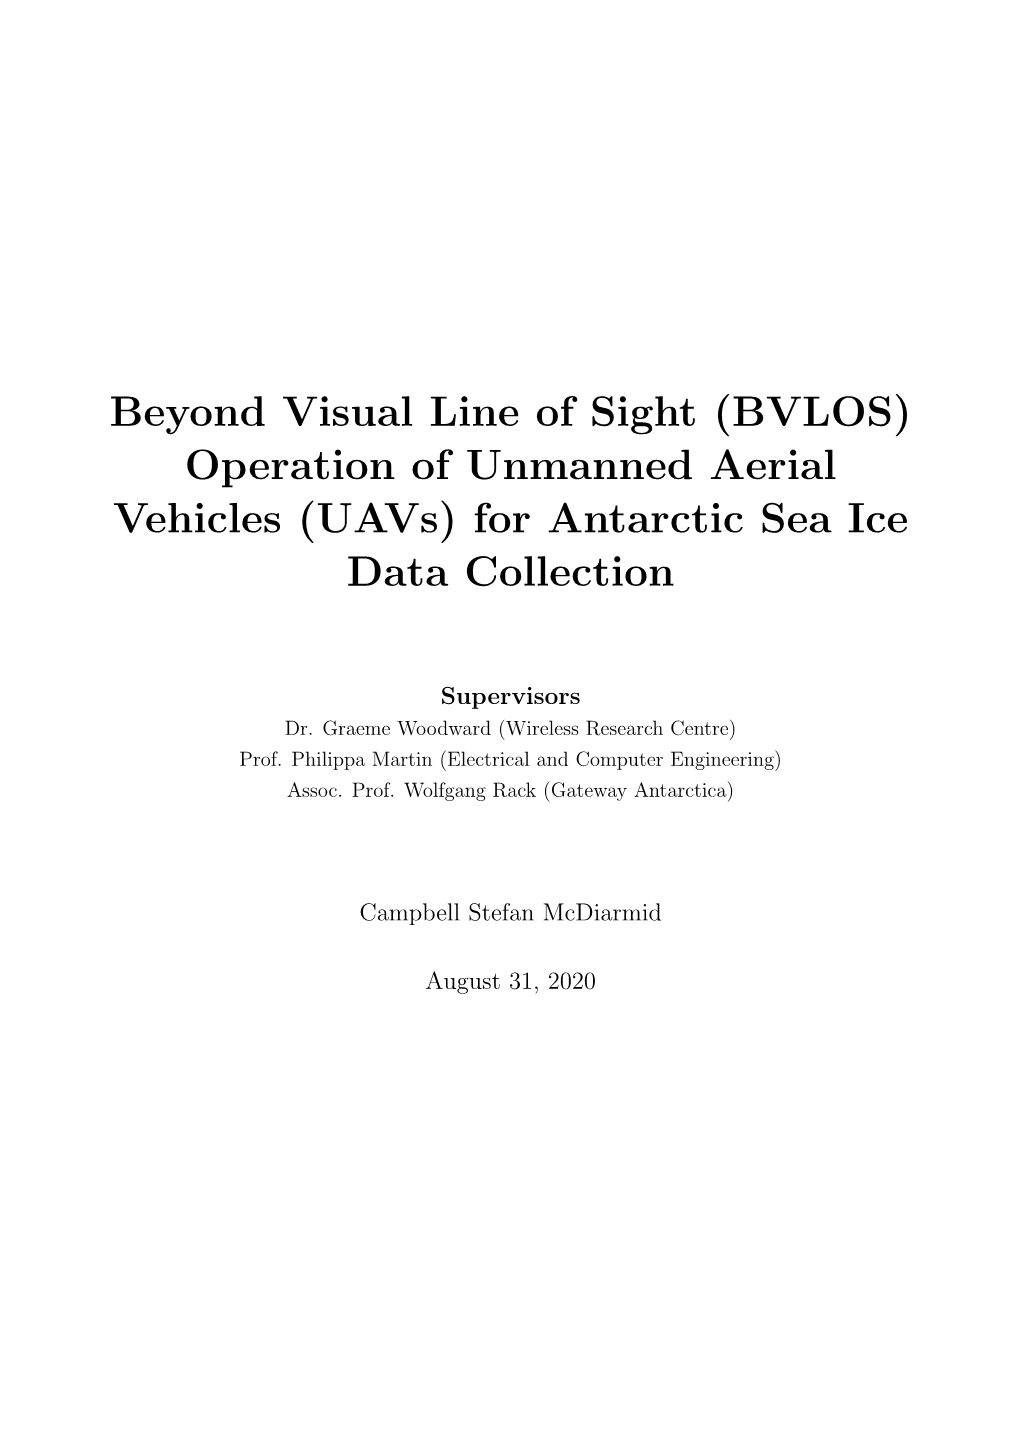 (BVLOS) Operation of Unmanned Aerial Vehicles (Uavs) for Antarctic Sea Ice Data Collection